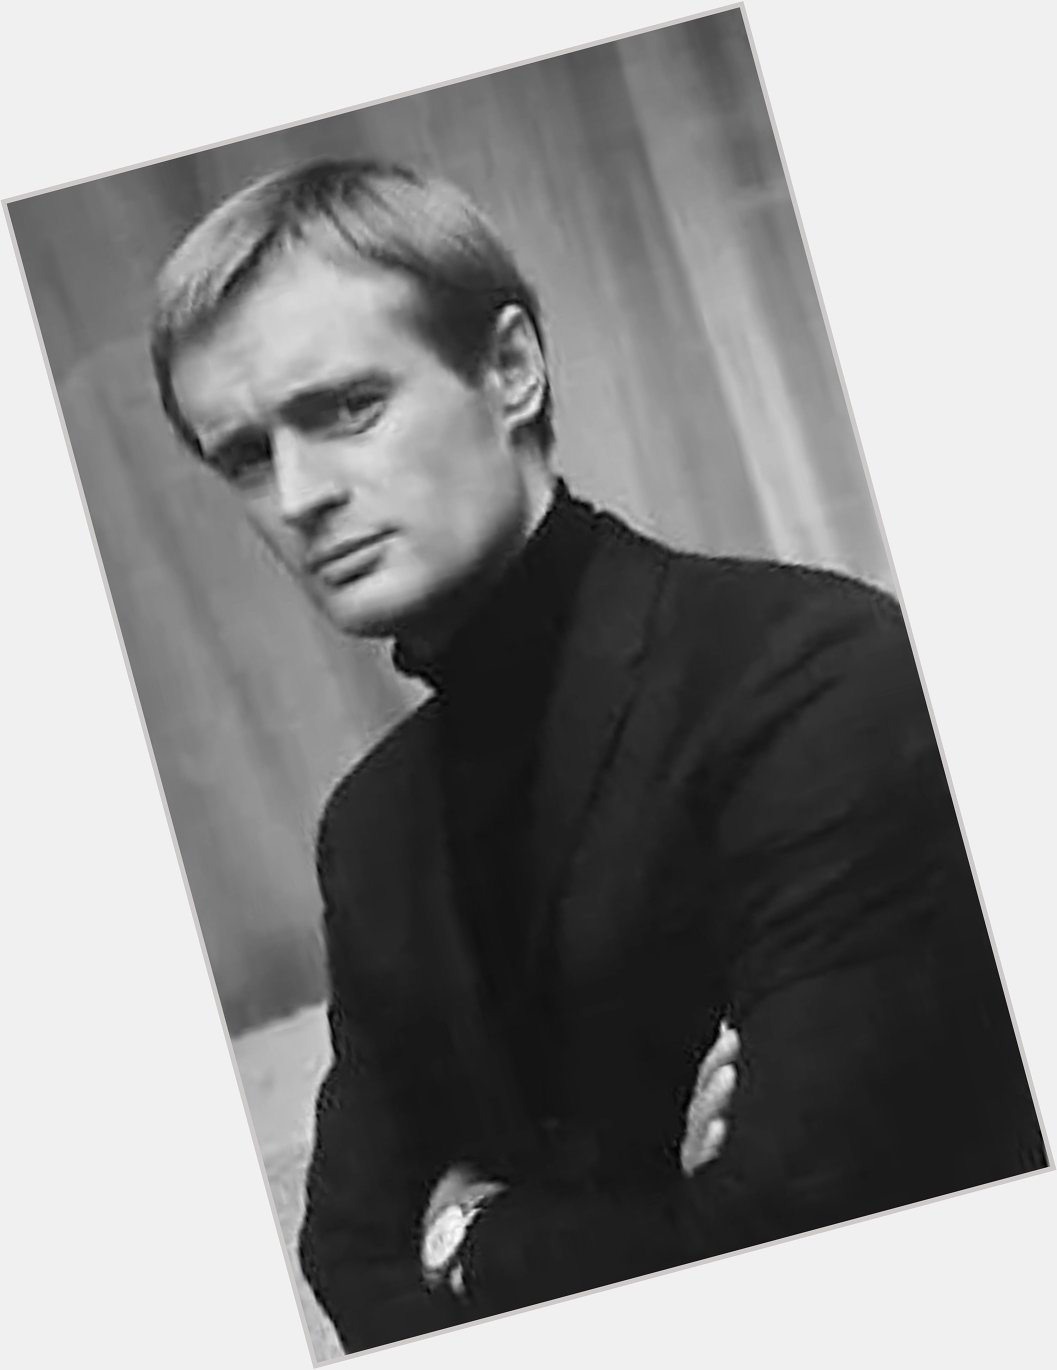 Happy birthday to David McCallum - Suave U.N.C.L.E. spy and brainy protagonist of THE OUTER LIMITS 